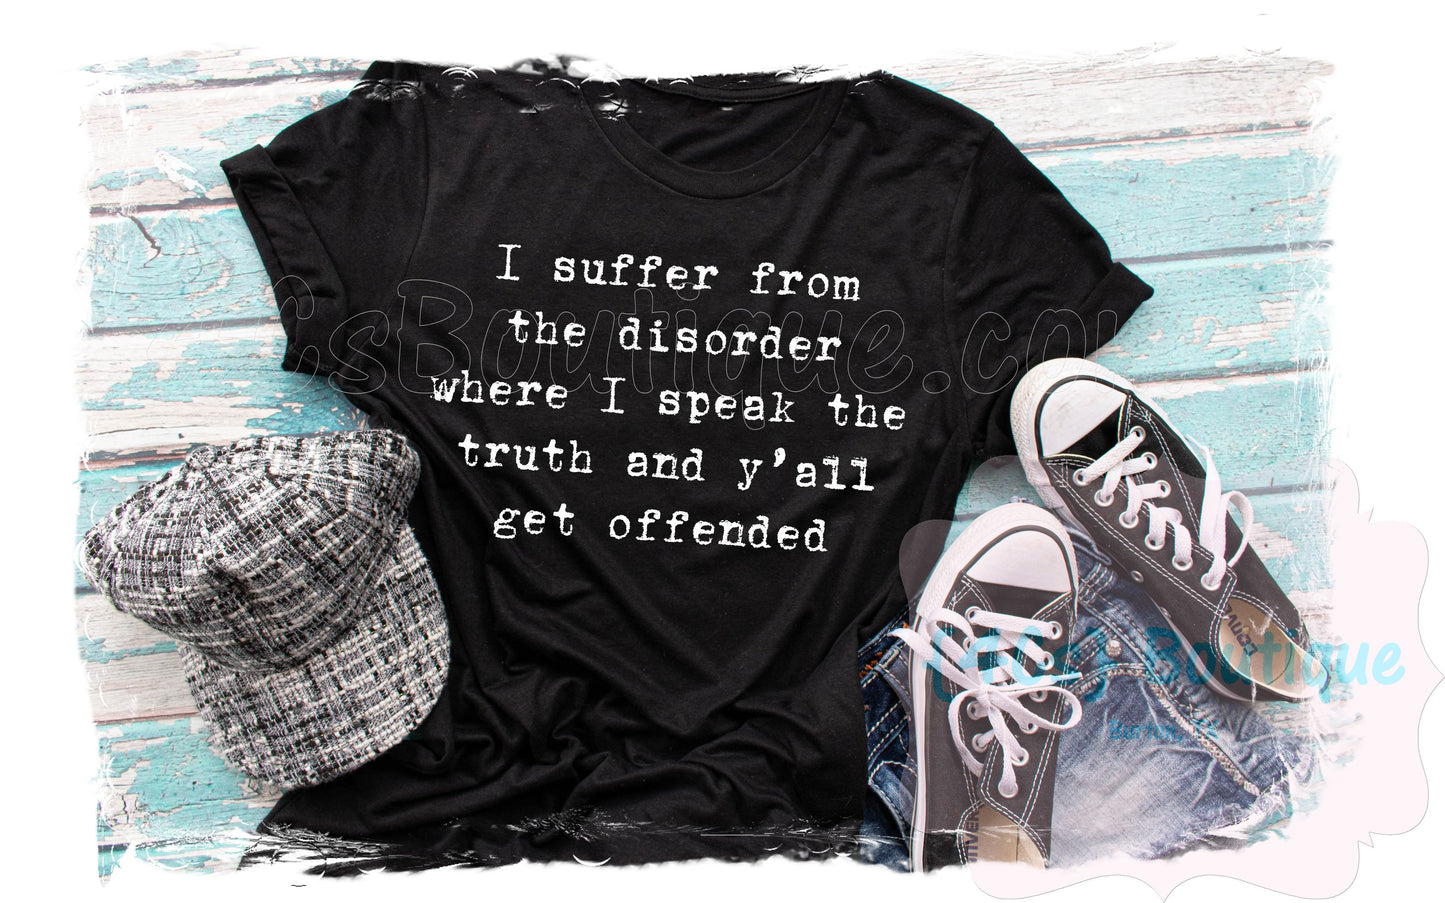 I Suffer From The Disorder Where I Speak The Truth and Y'all Get Offended Shirt